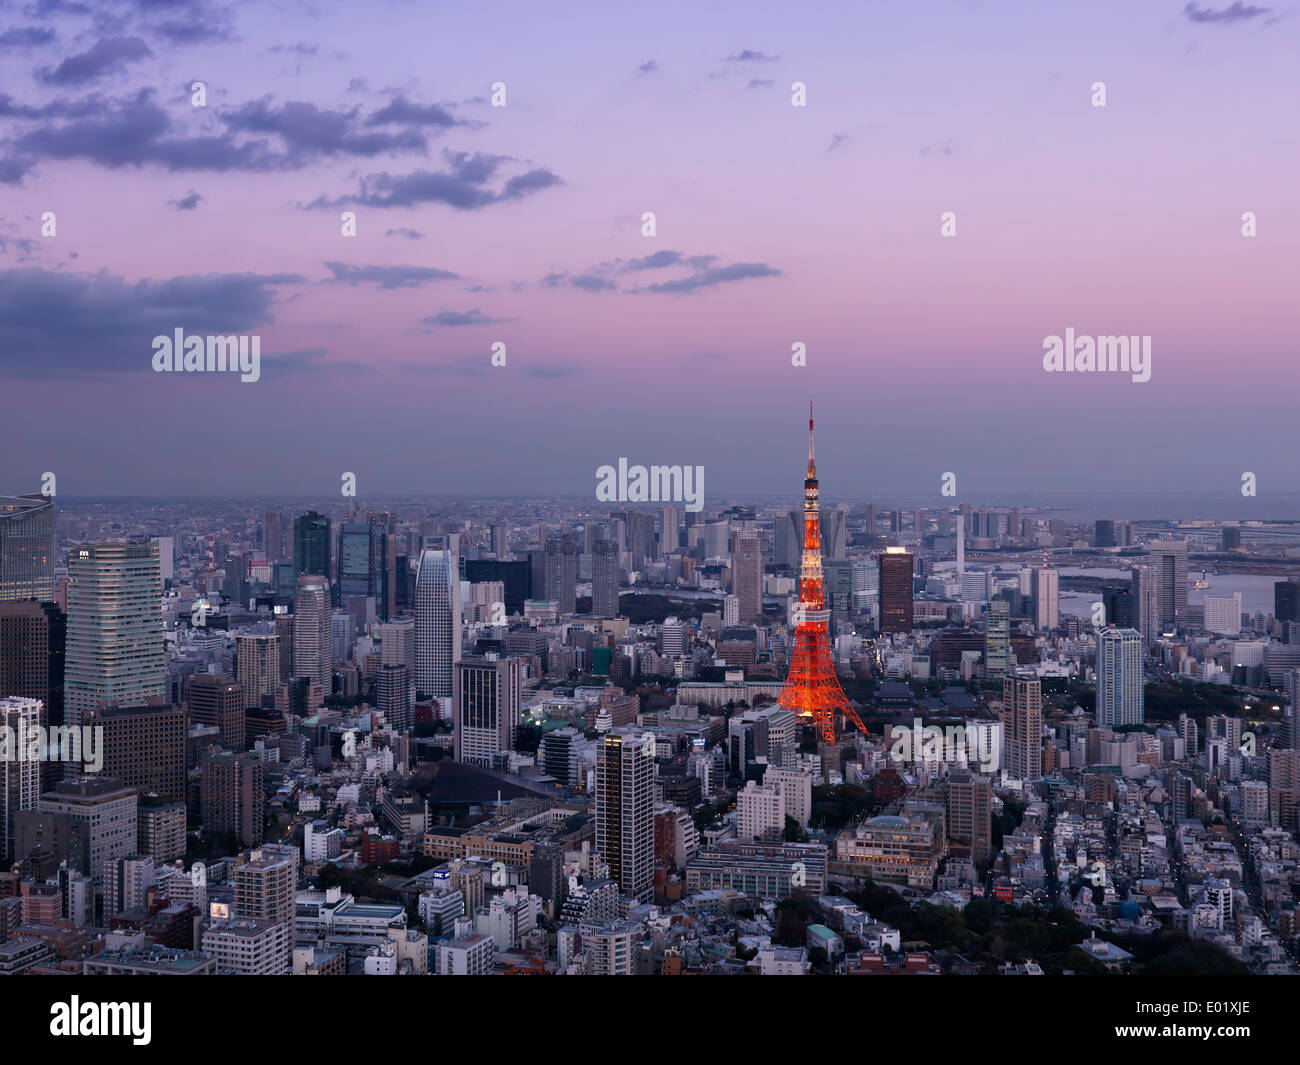 Illuminated bright red Tokyo Tower in city landscape dramatic aerial twilight scenery. Tokyo, Japan. Stock Photo